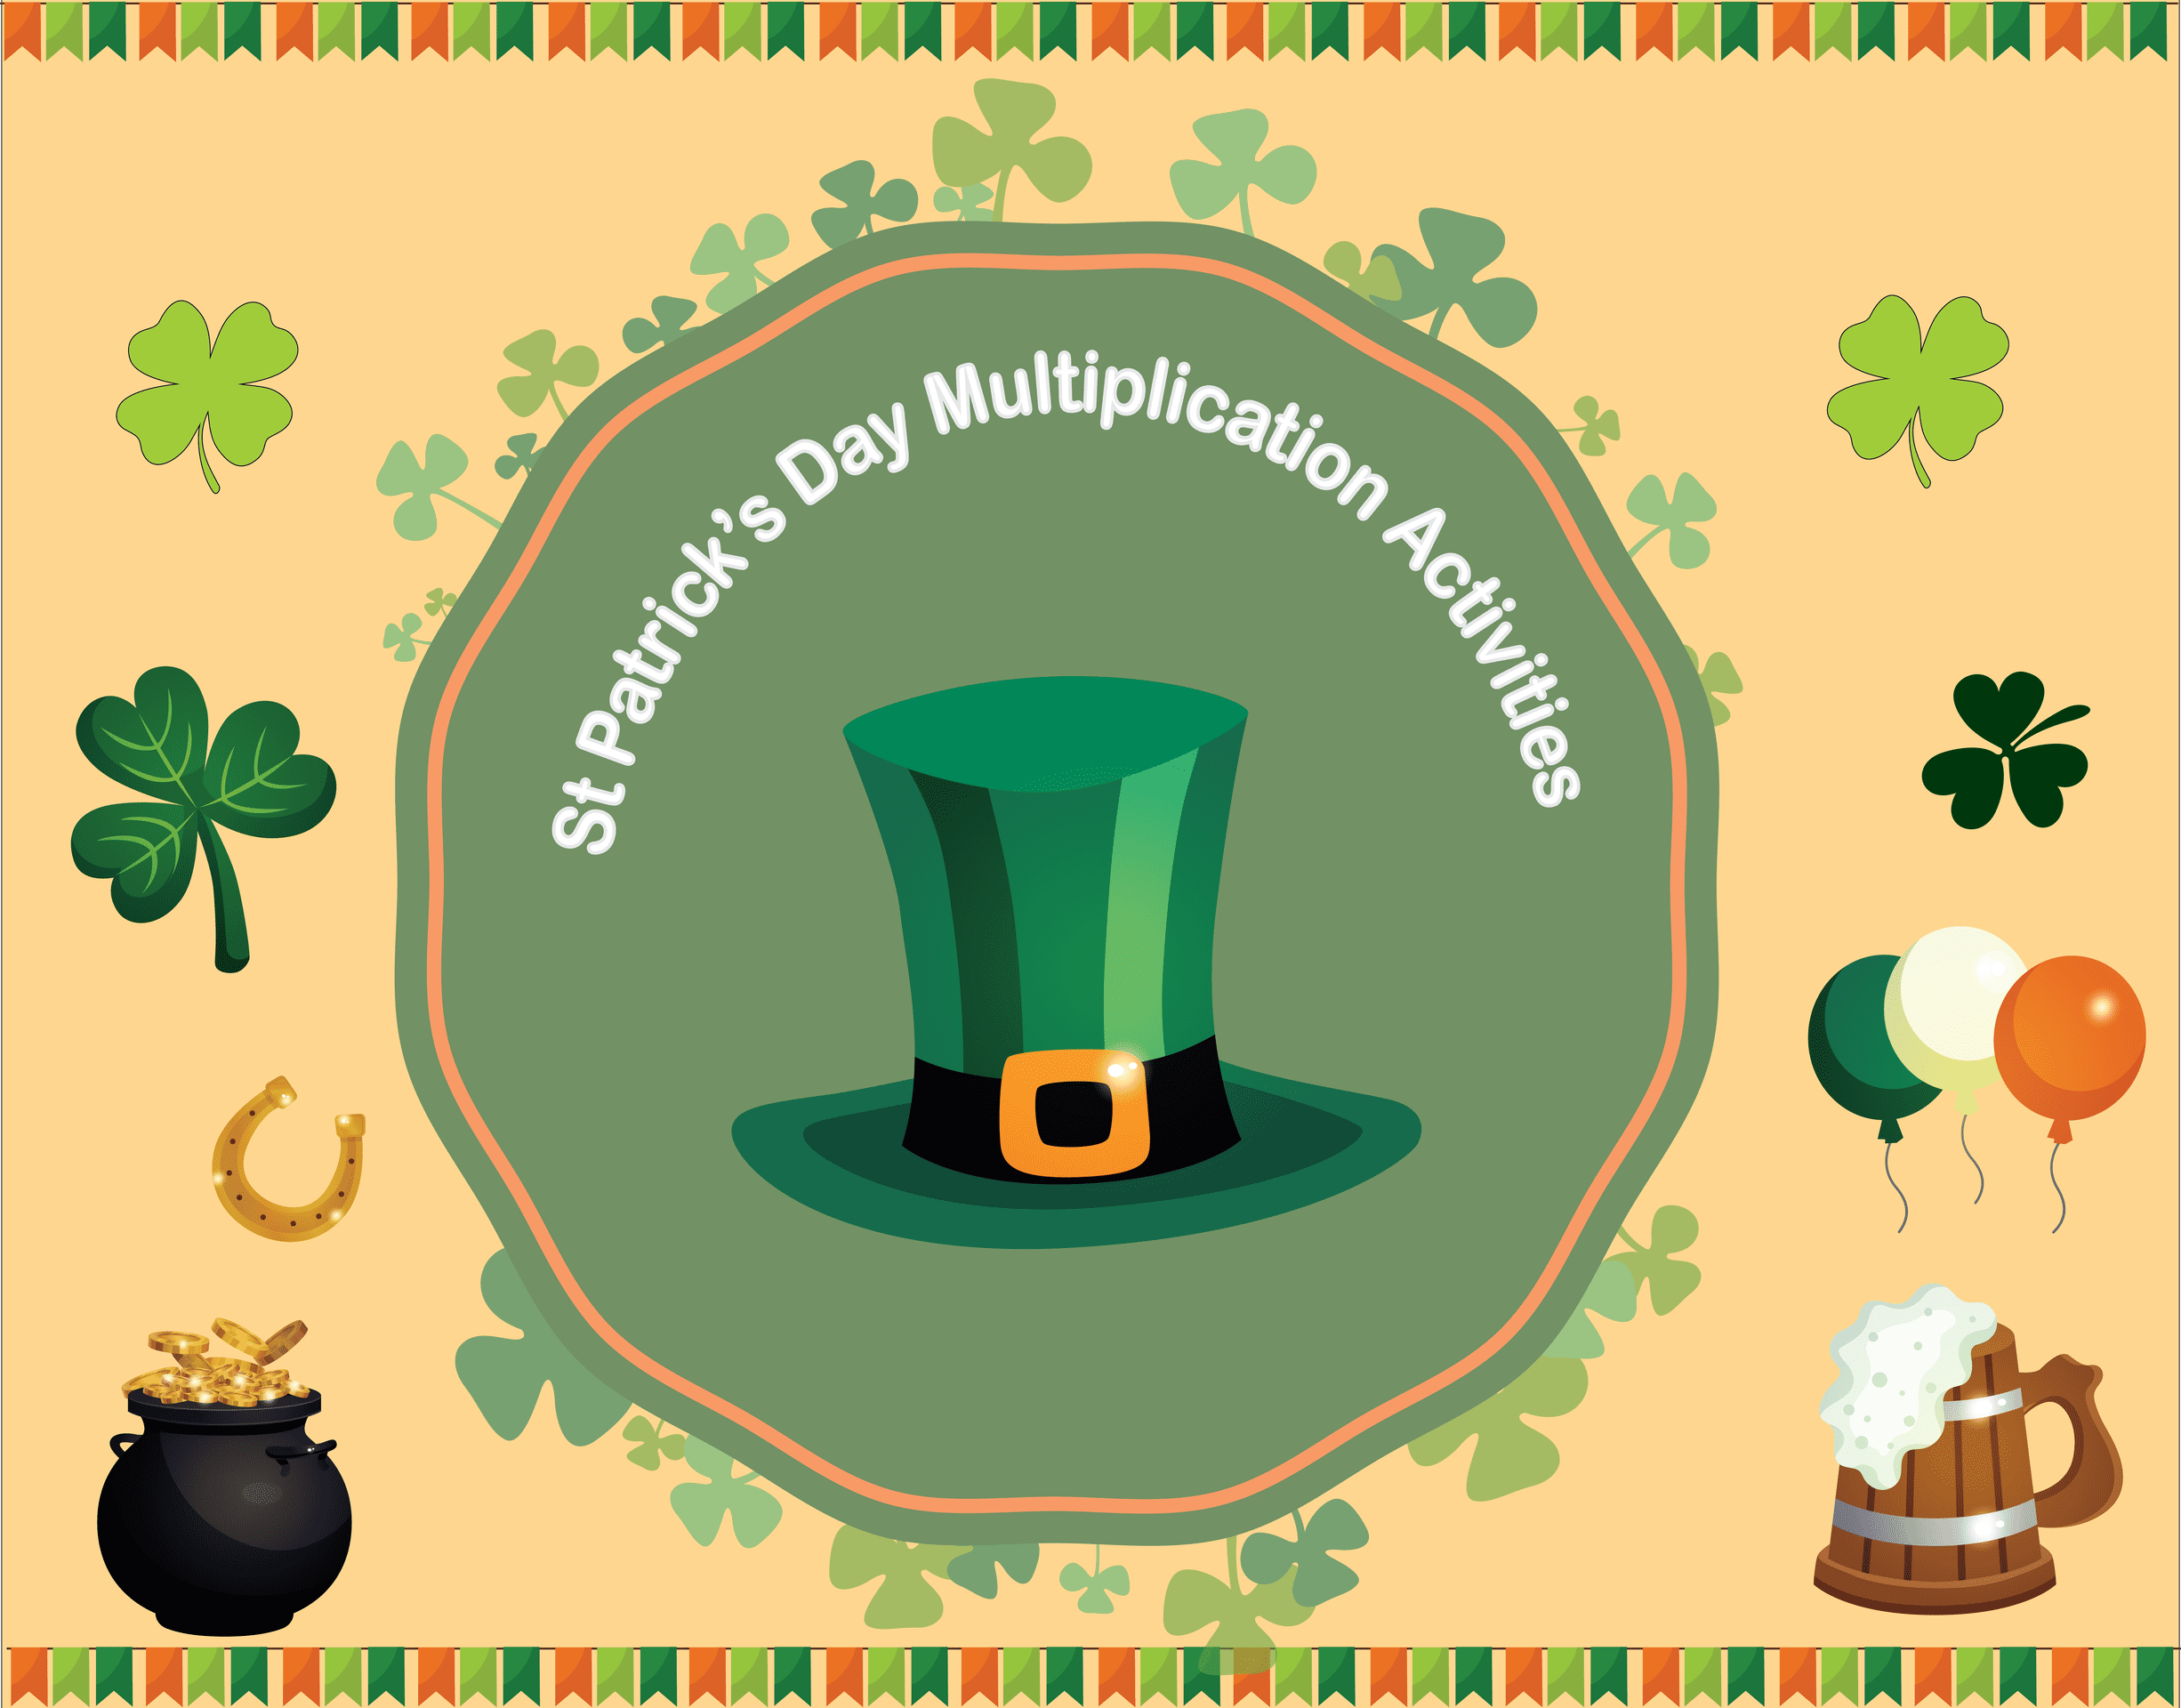 St. Patrick’s Day Multiplication Activities | Free Worksheet